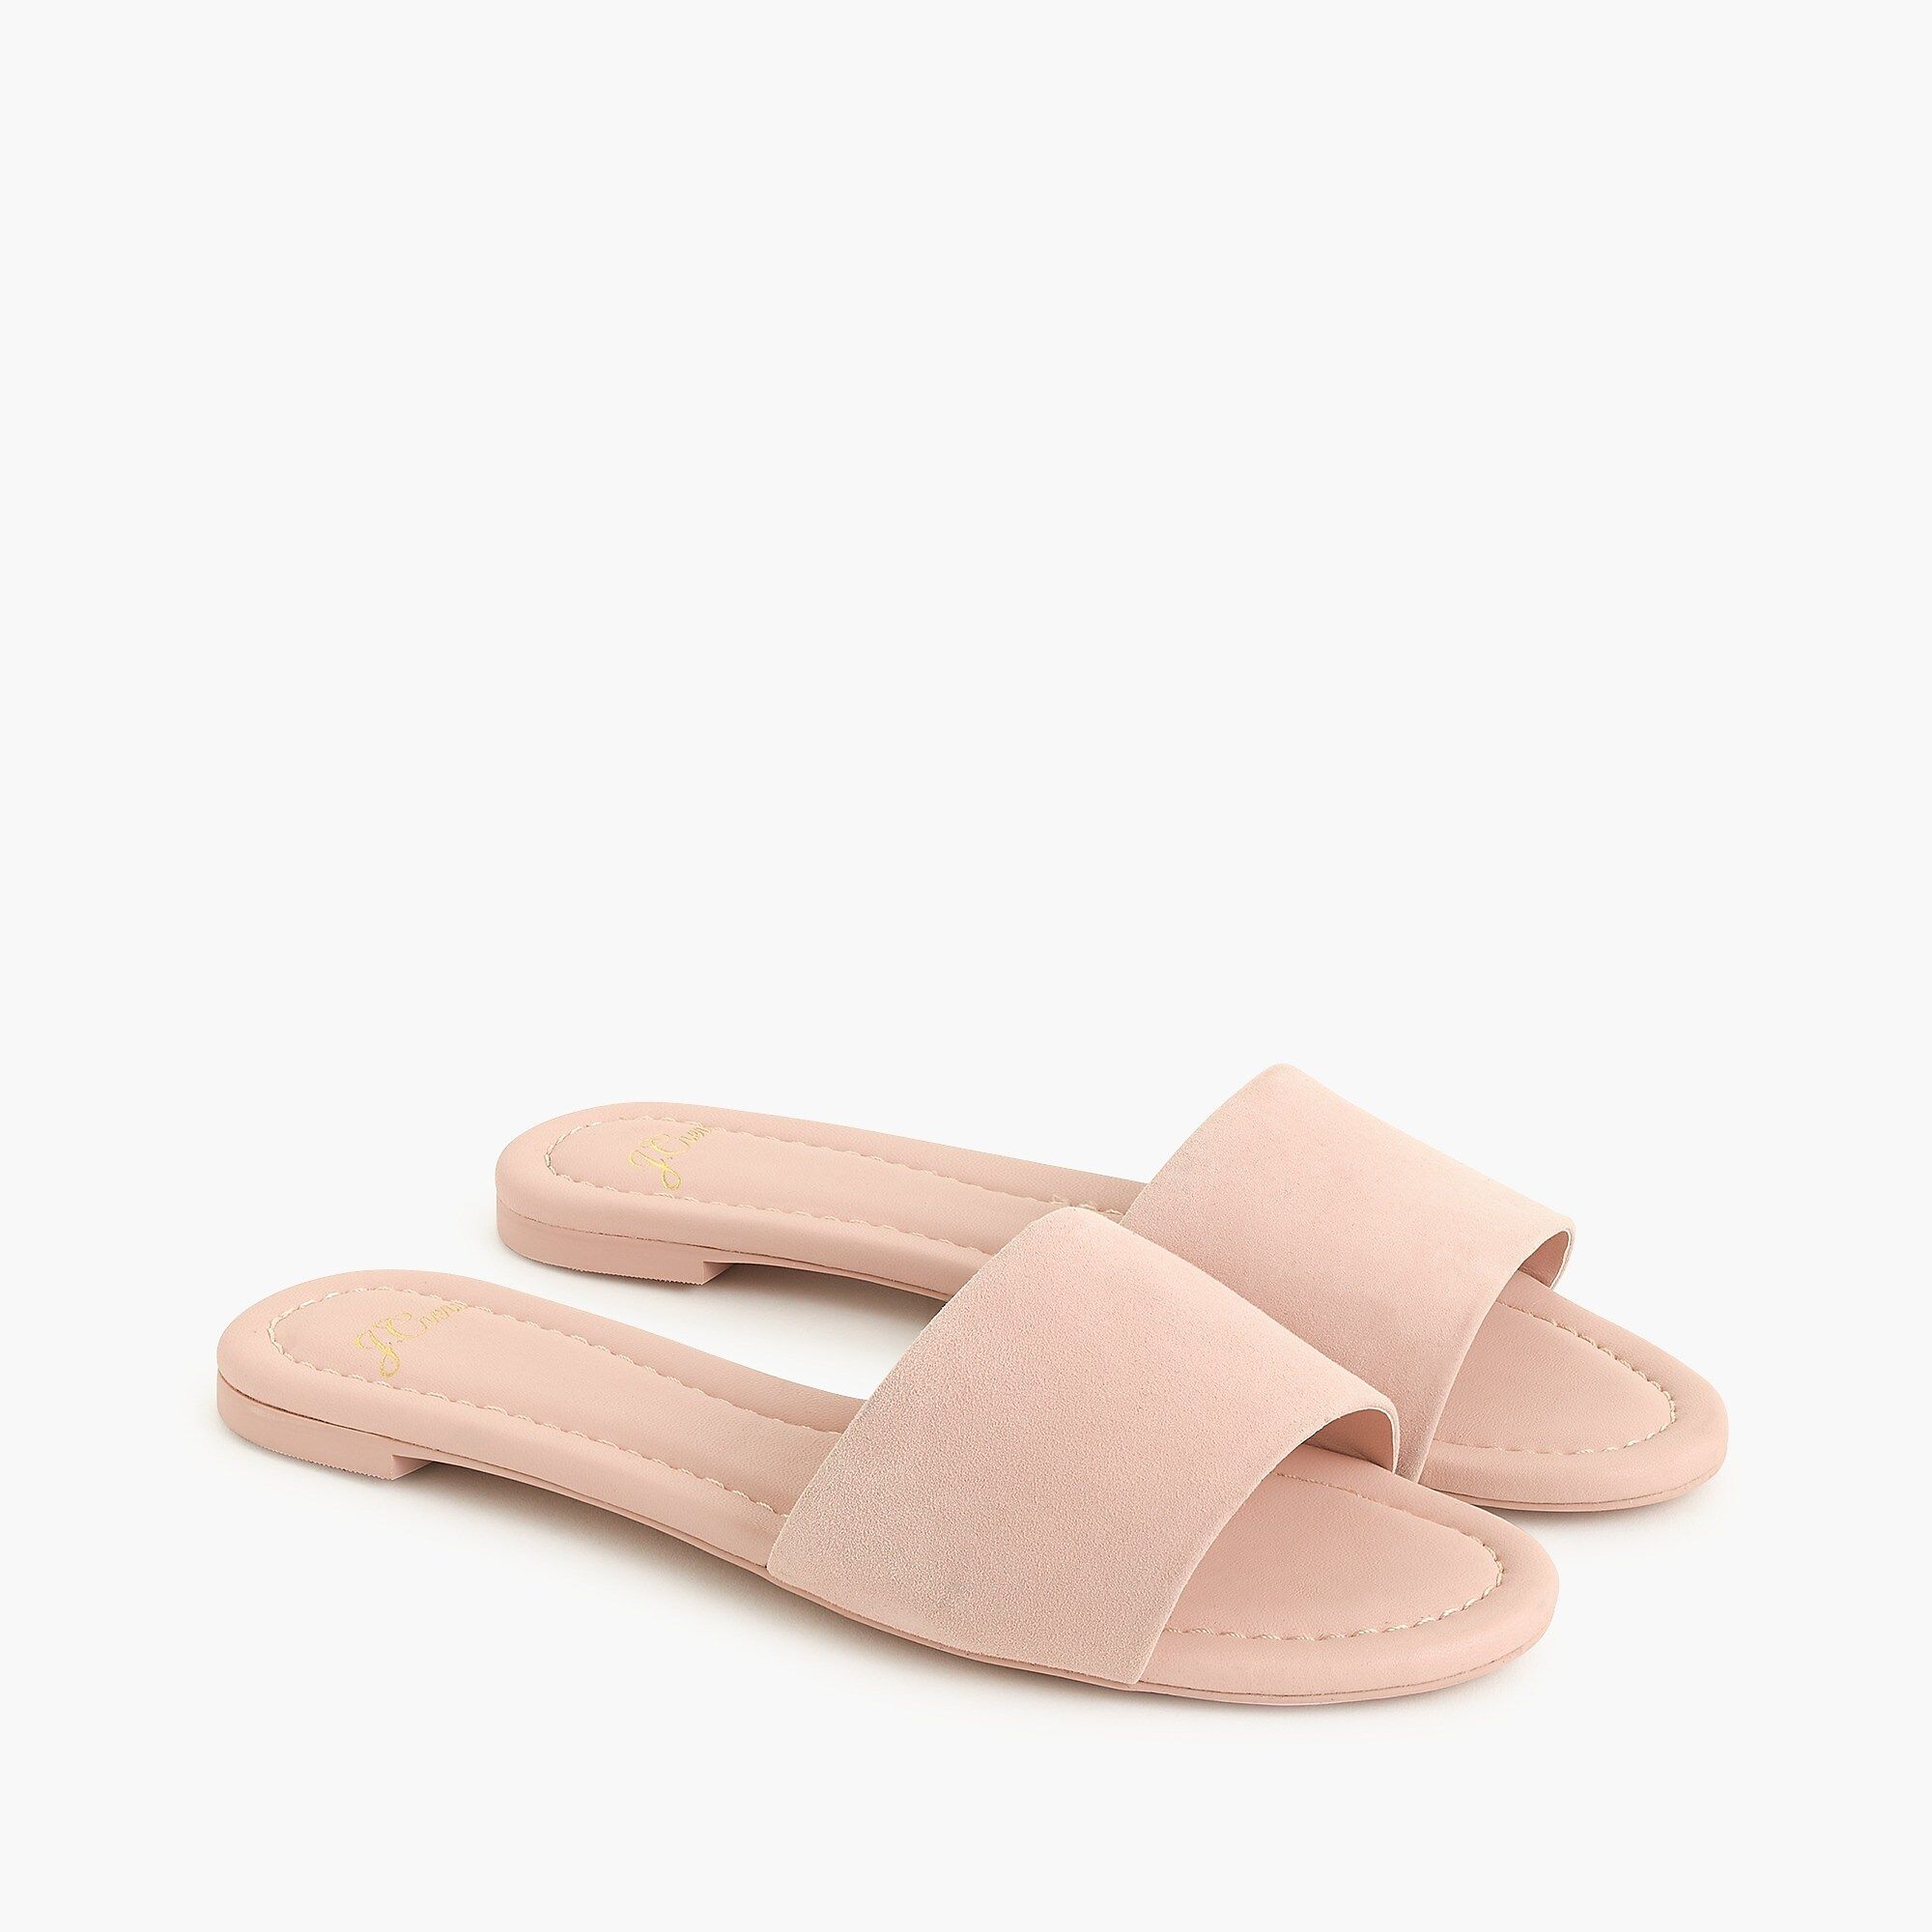 Cora slide sandals with rubber bottom in suede | J.Crew US